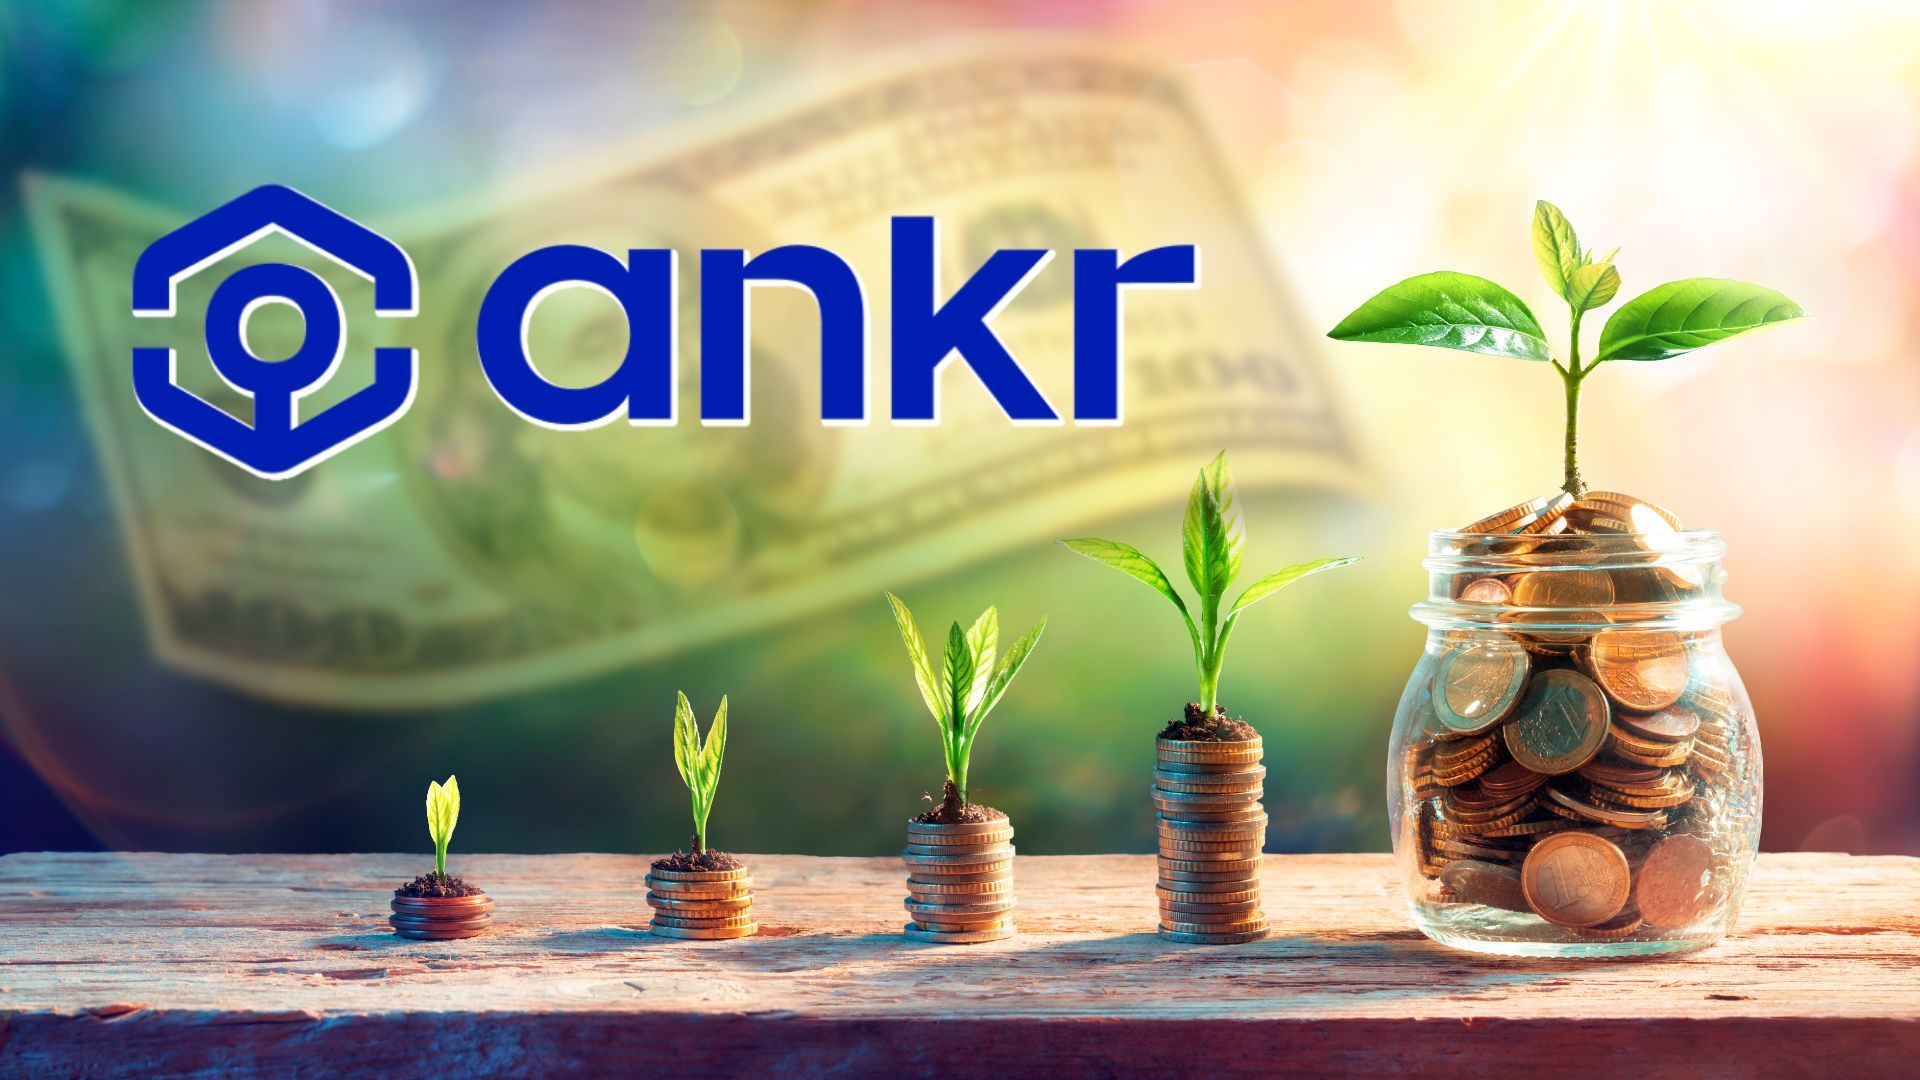 Ankr (ANKR) Staking: How To Earn A Passive Income And Rewards